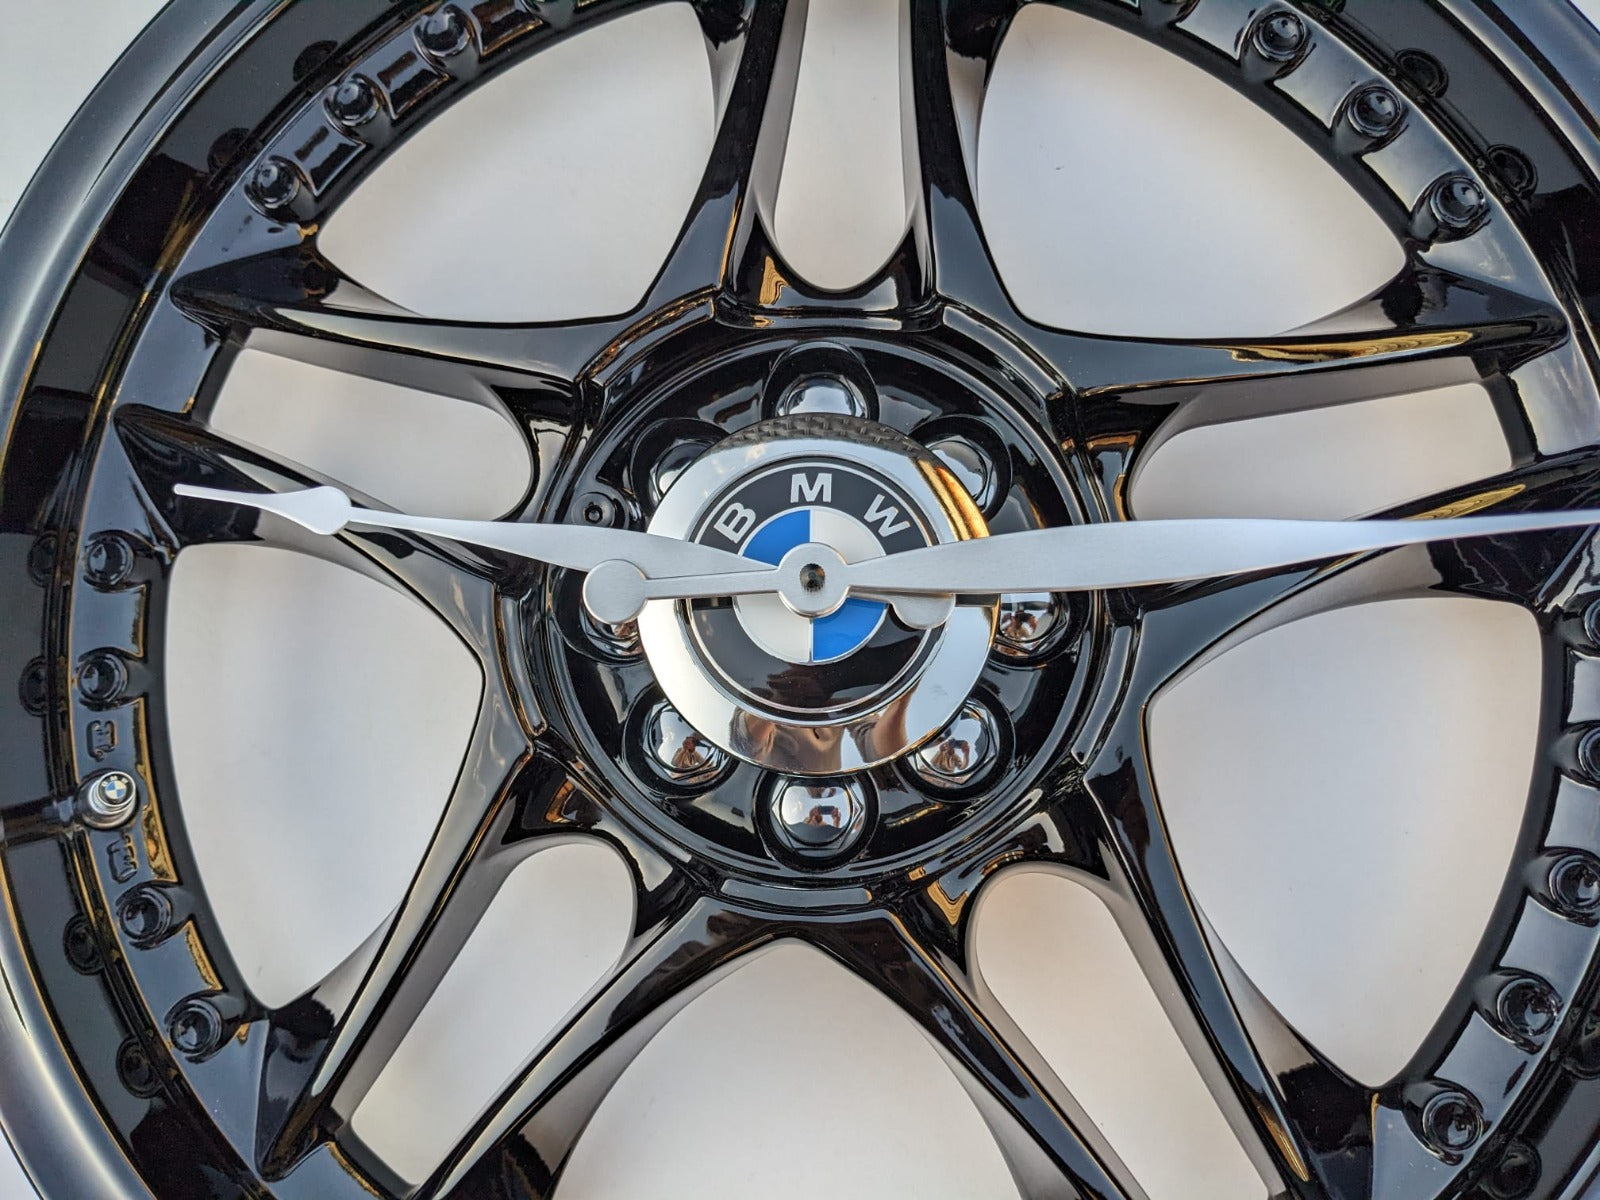 Alloy Wheel upcycled to stunning BMW Wheel wall clock (or car brand of your choice)